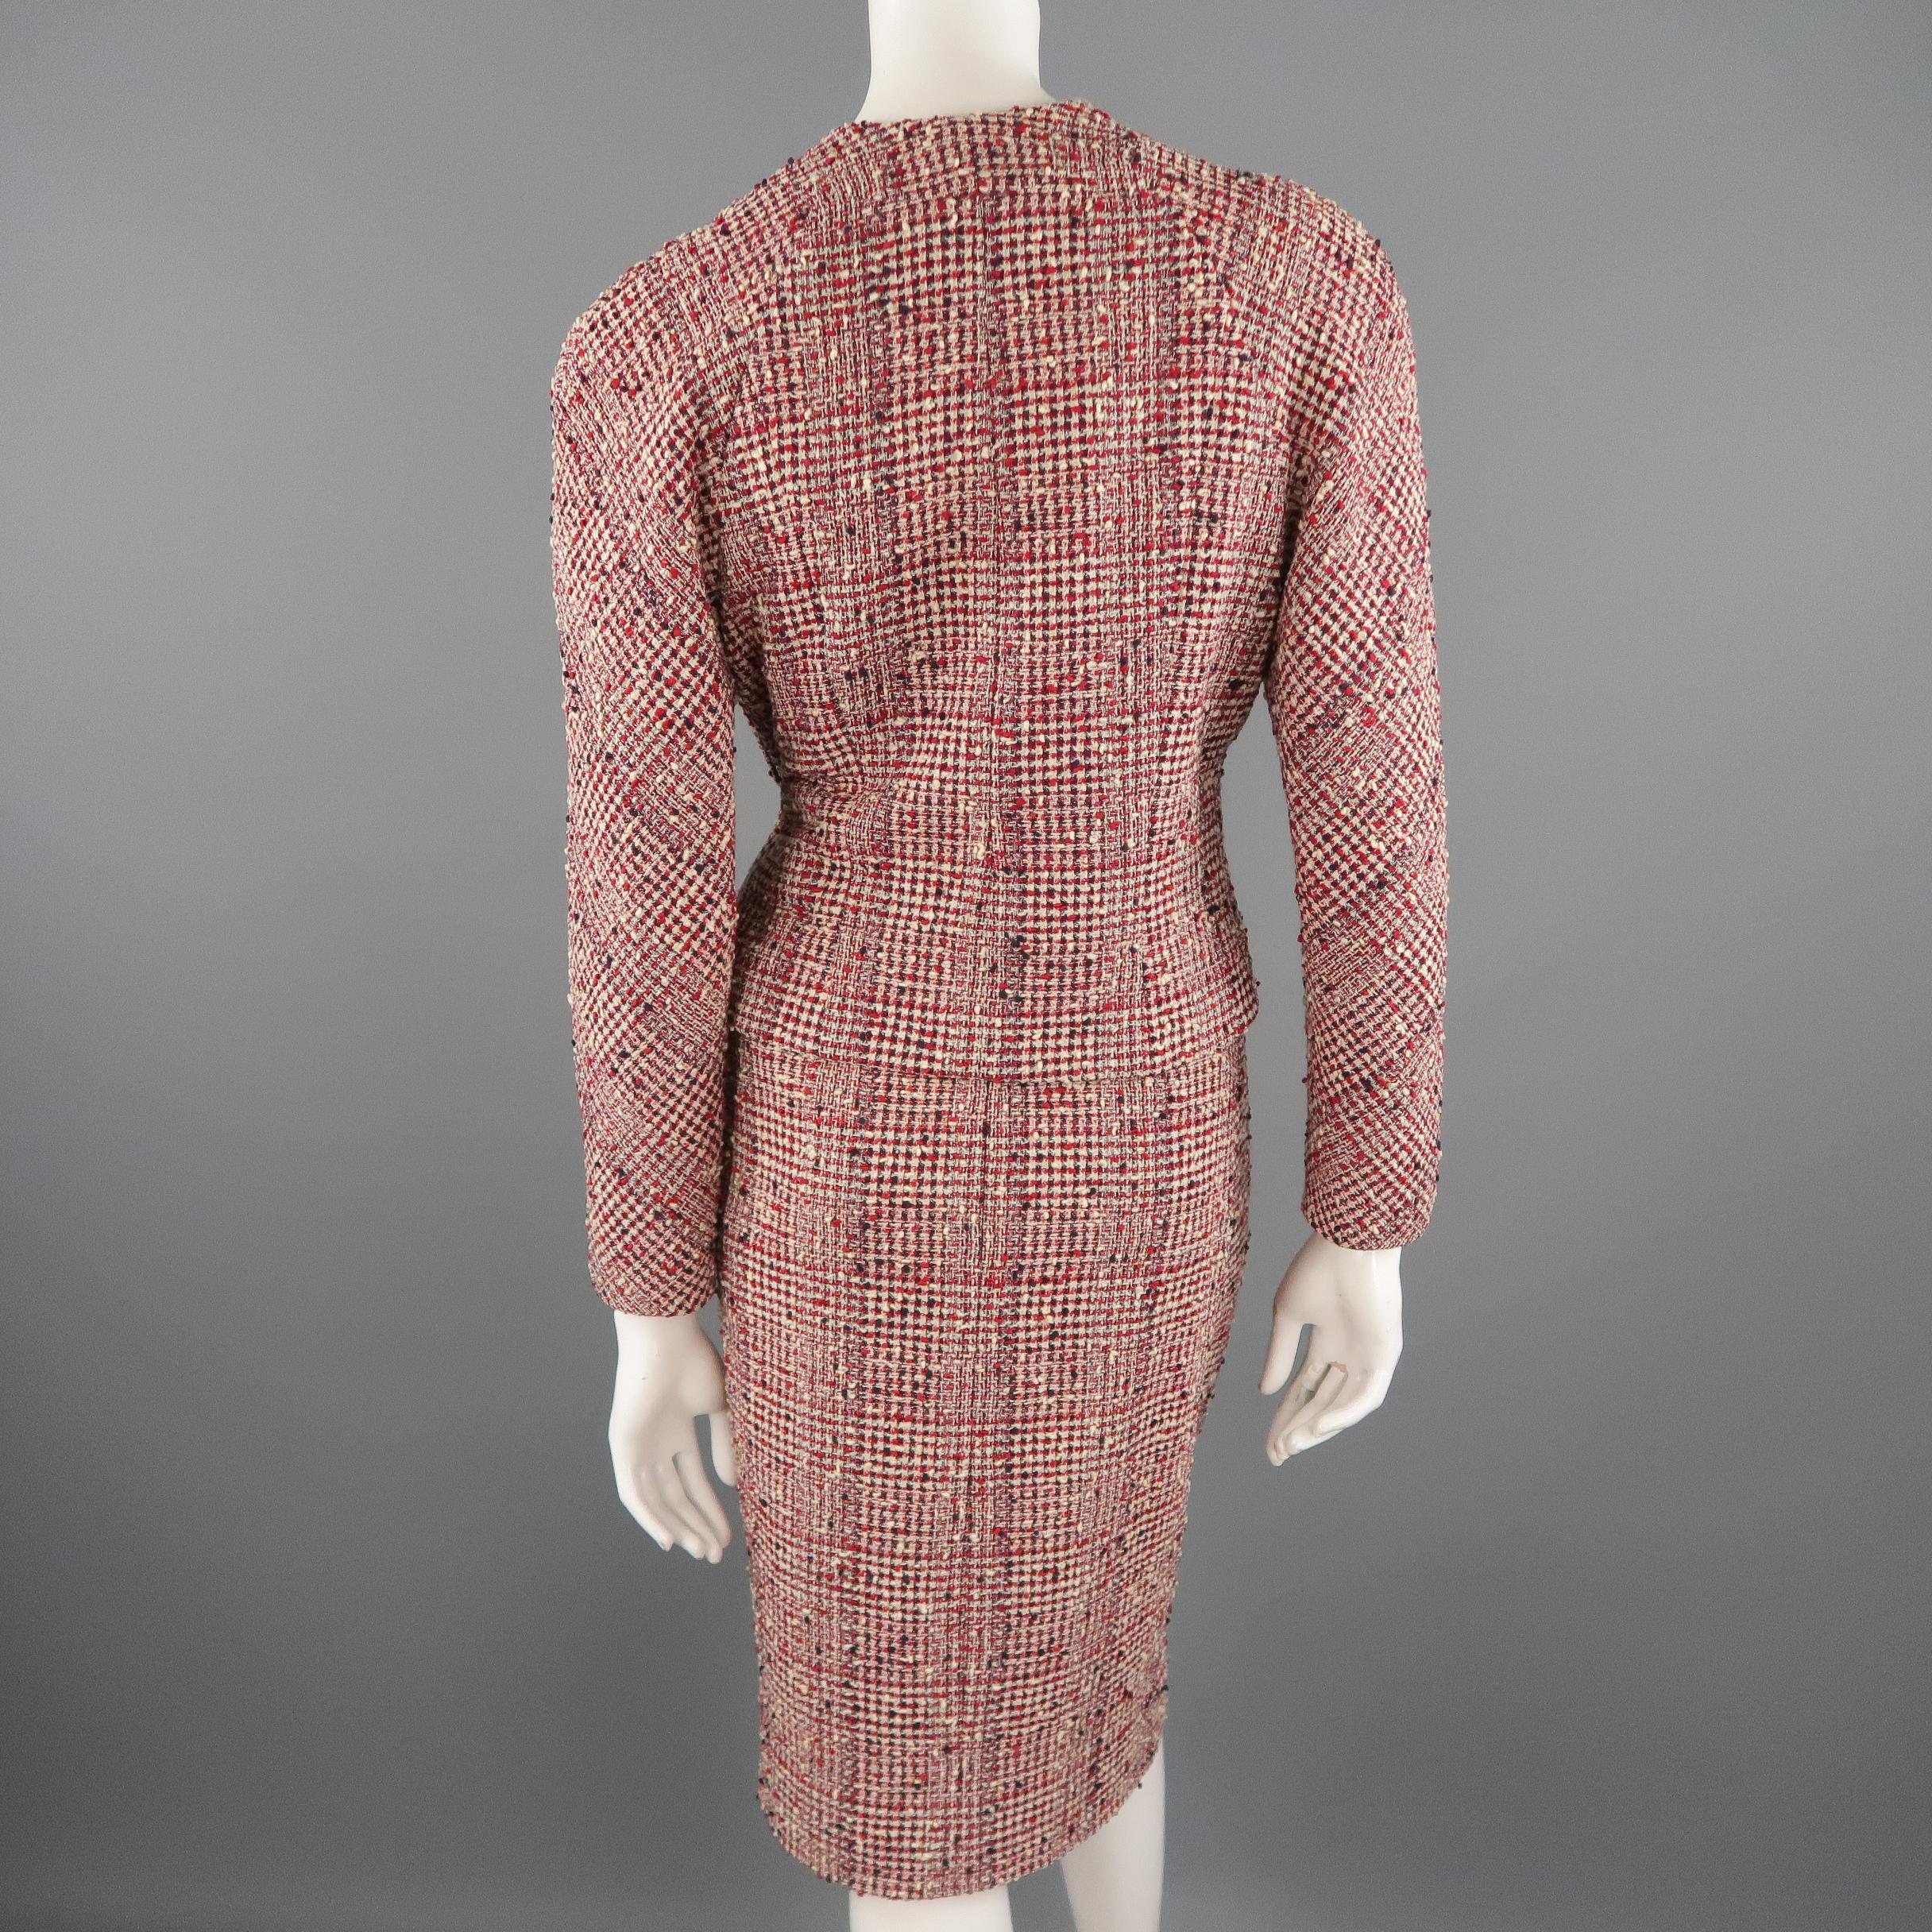 Women's Vintage CHANEL Size M Red Cream & Navy Plaid Boucle Skirt Suit